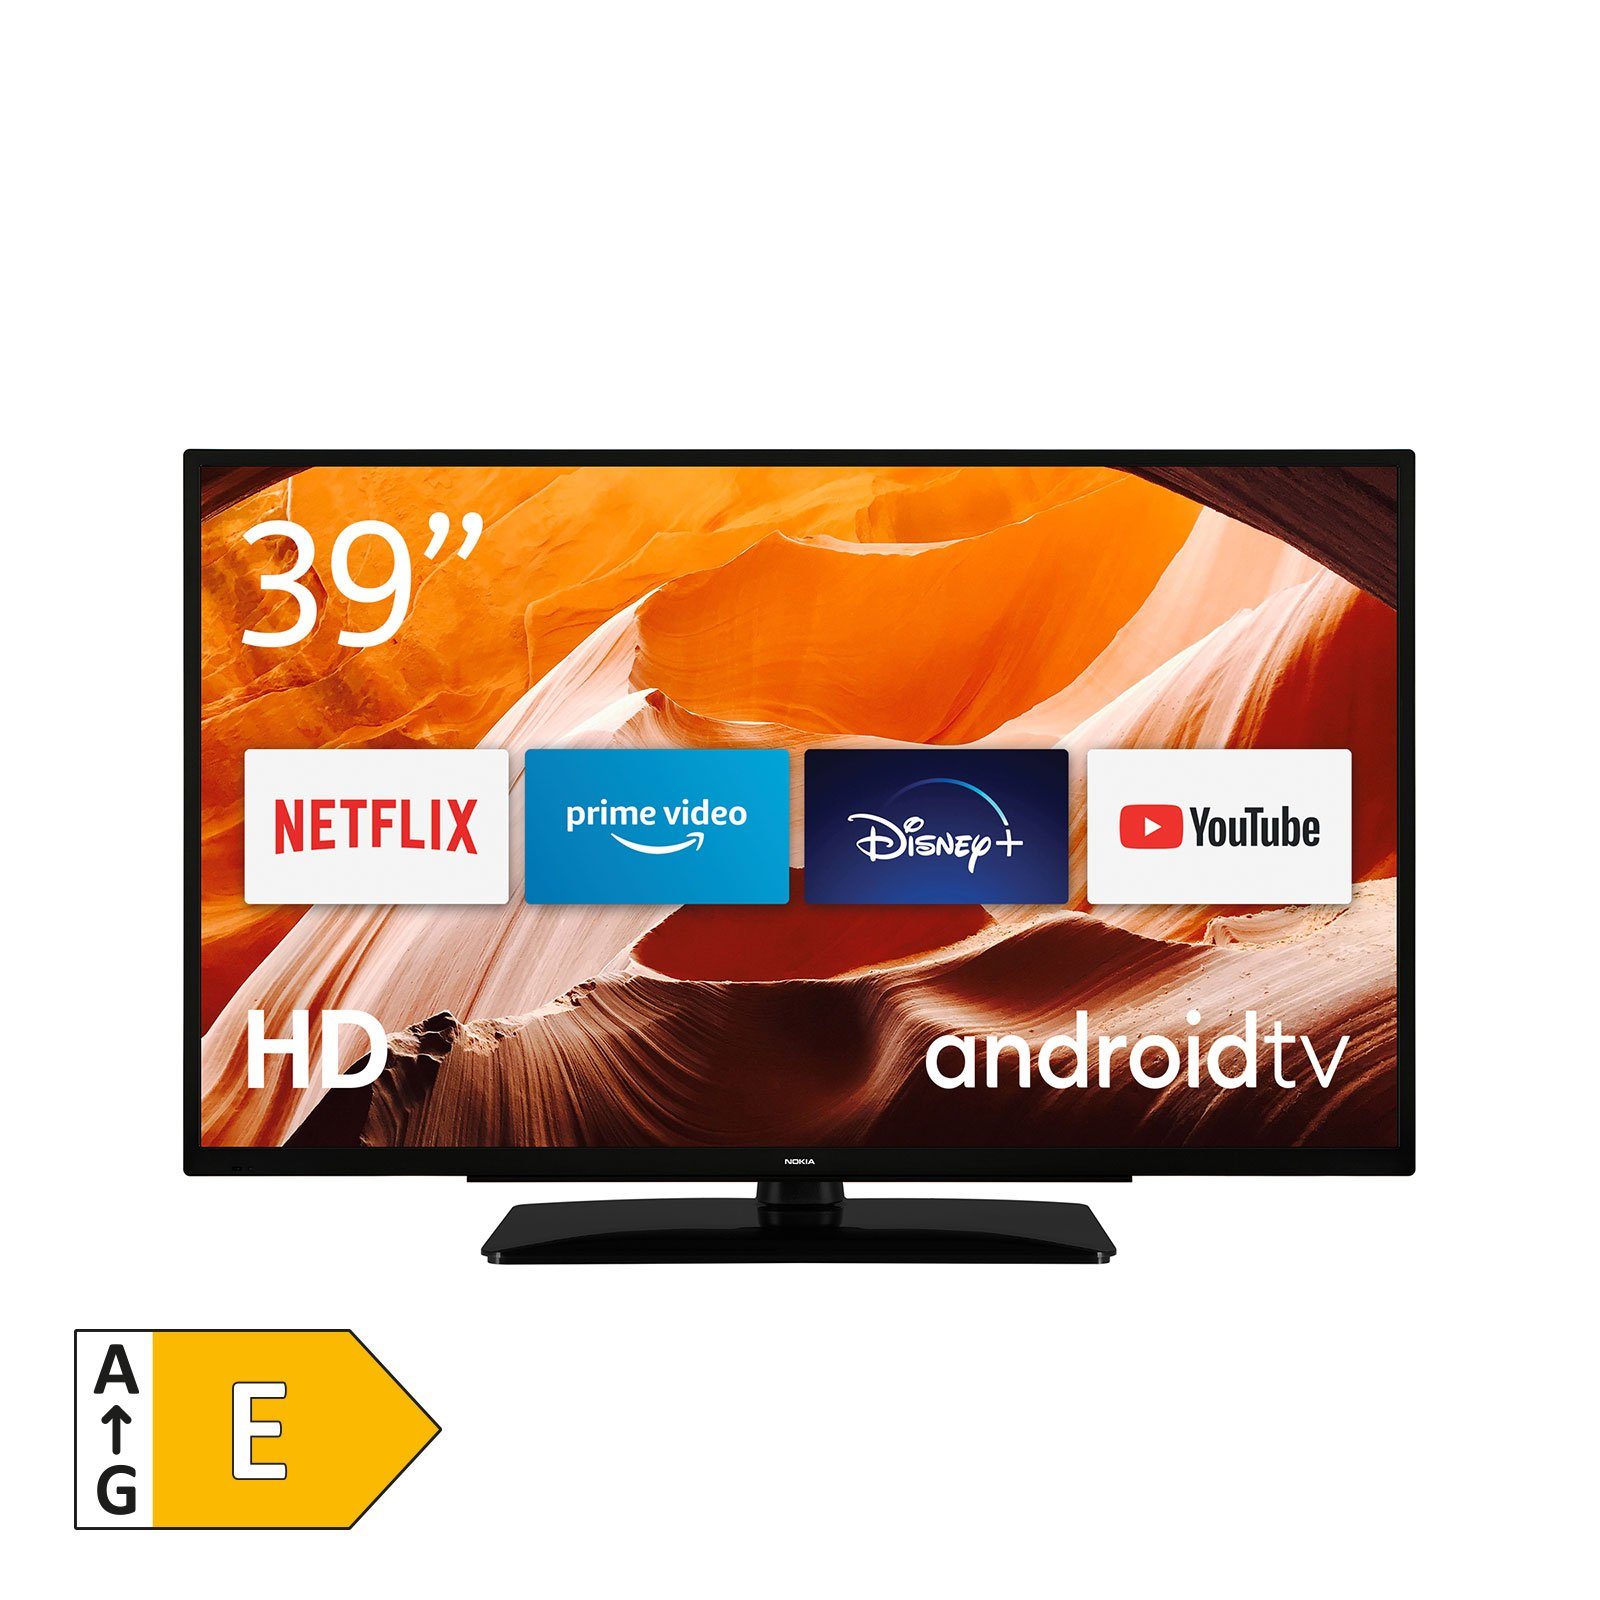 Nokia HNE39GV210 LED-Fernseher (98 cm/39 Zoll, HD, Android TV)